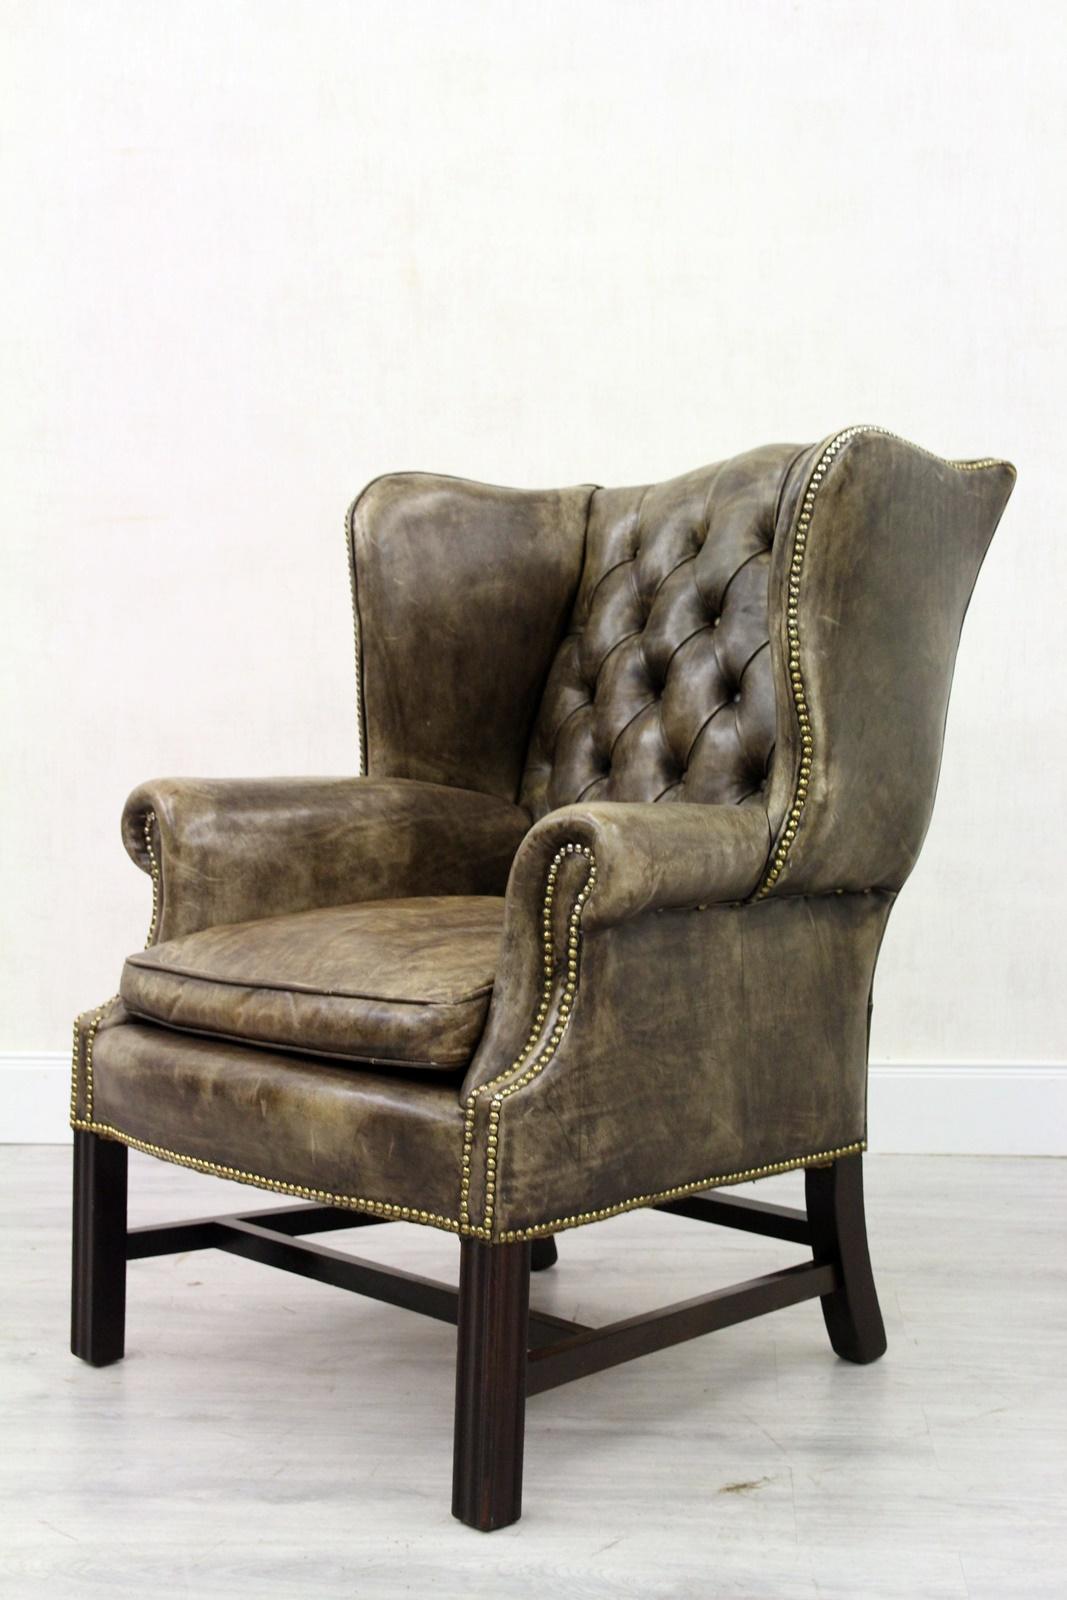 2 Chesterfield Armchair Wing Chair Antique Chair im Angebot 1